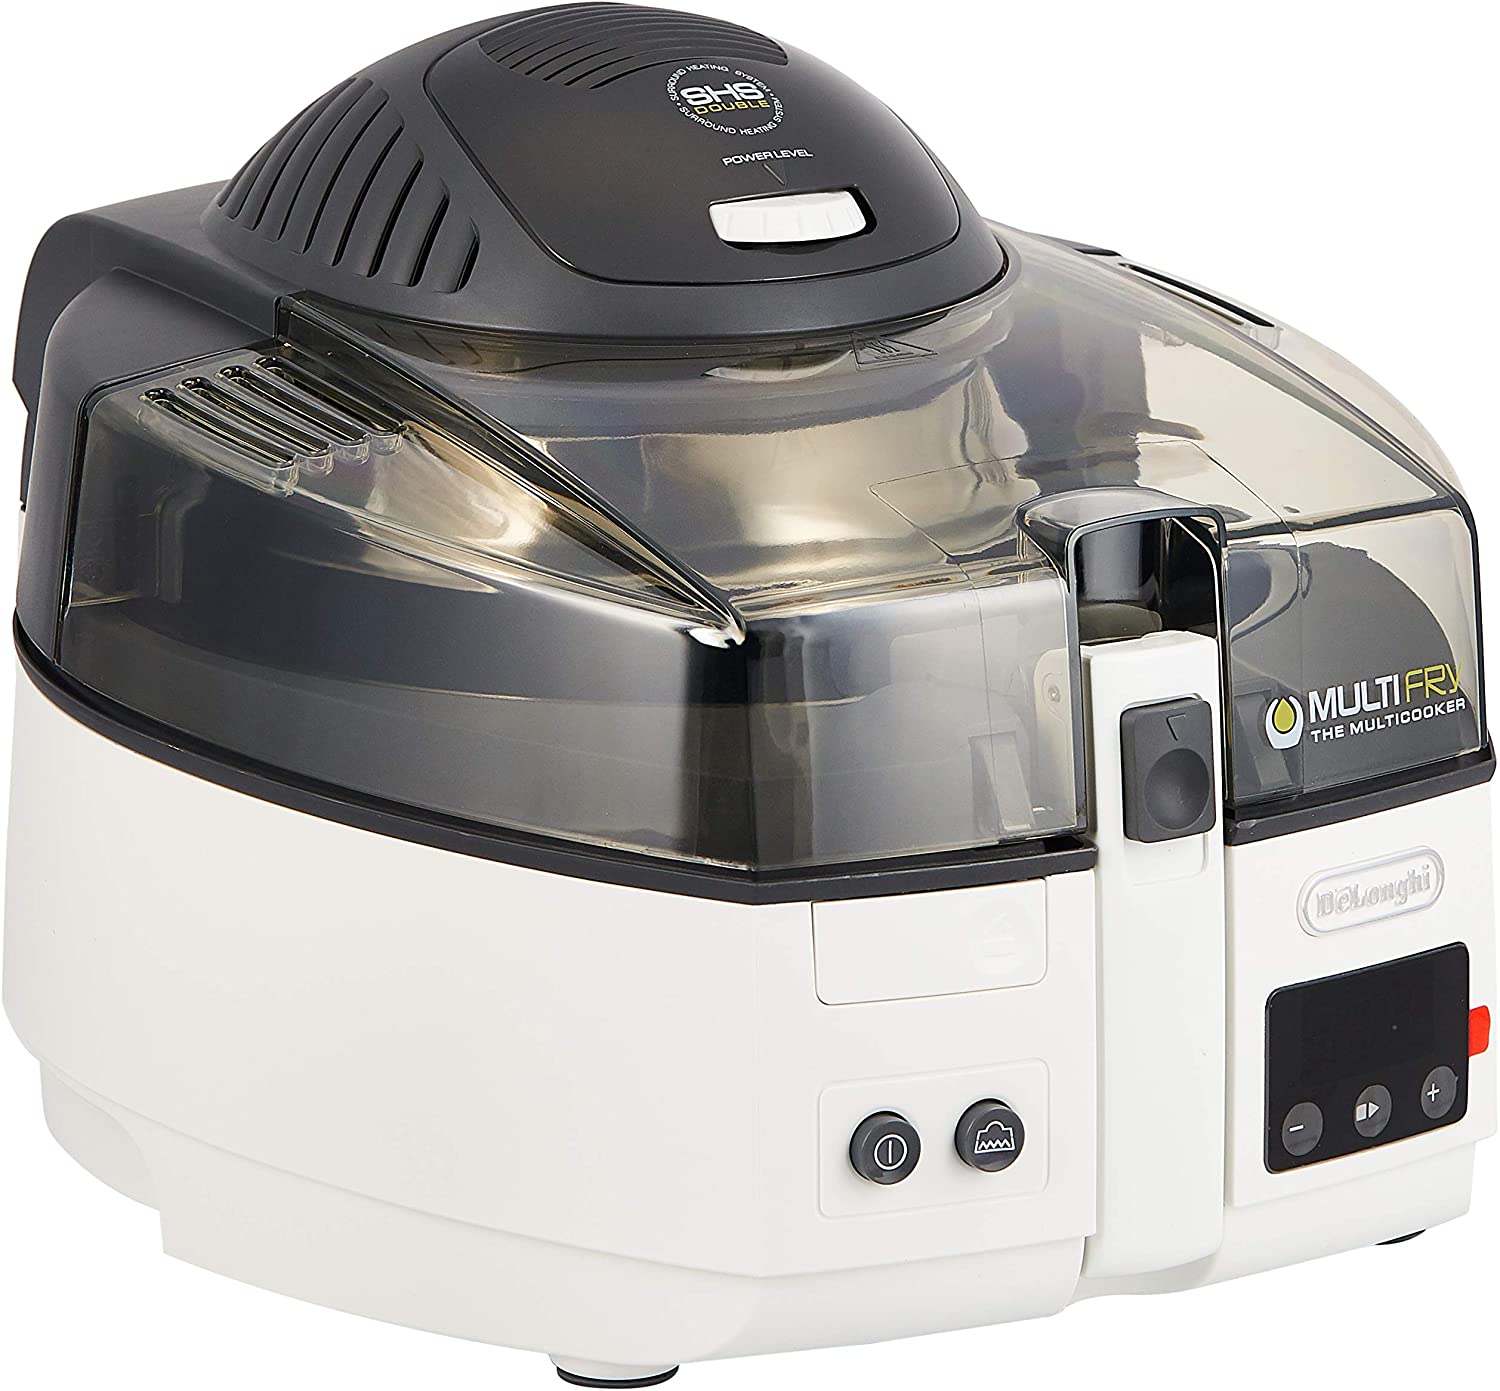 https://www.220stores.com/Shared/Images/Product/DeLonghi-FH1175-220-Volt-Multi-Fry-Multi-Cooker-For-Overseas-Use-Export-To-Europe-Asia-Africa/FH1175.jpg